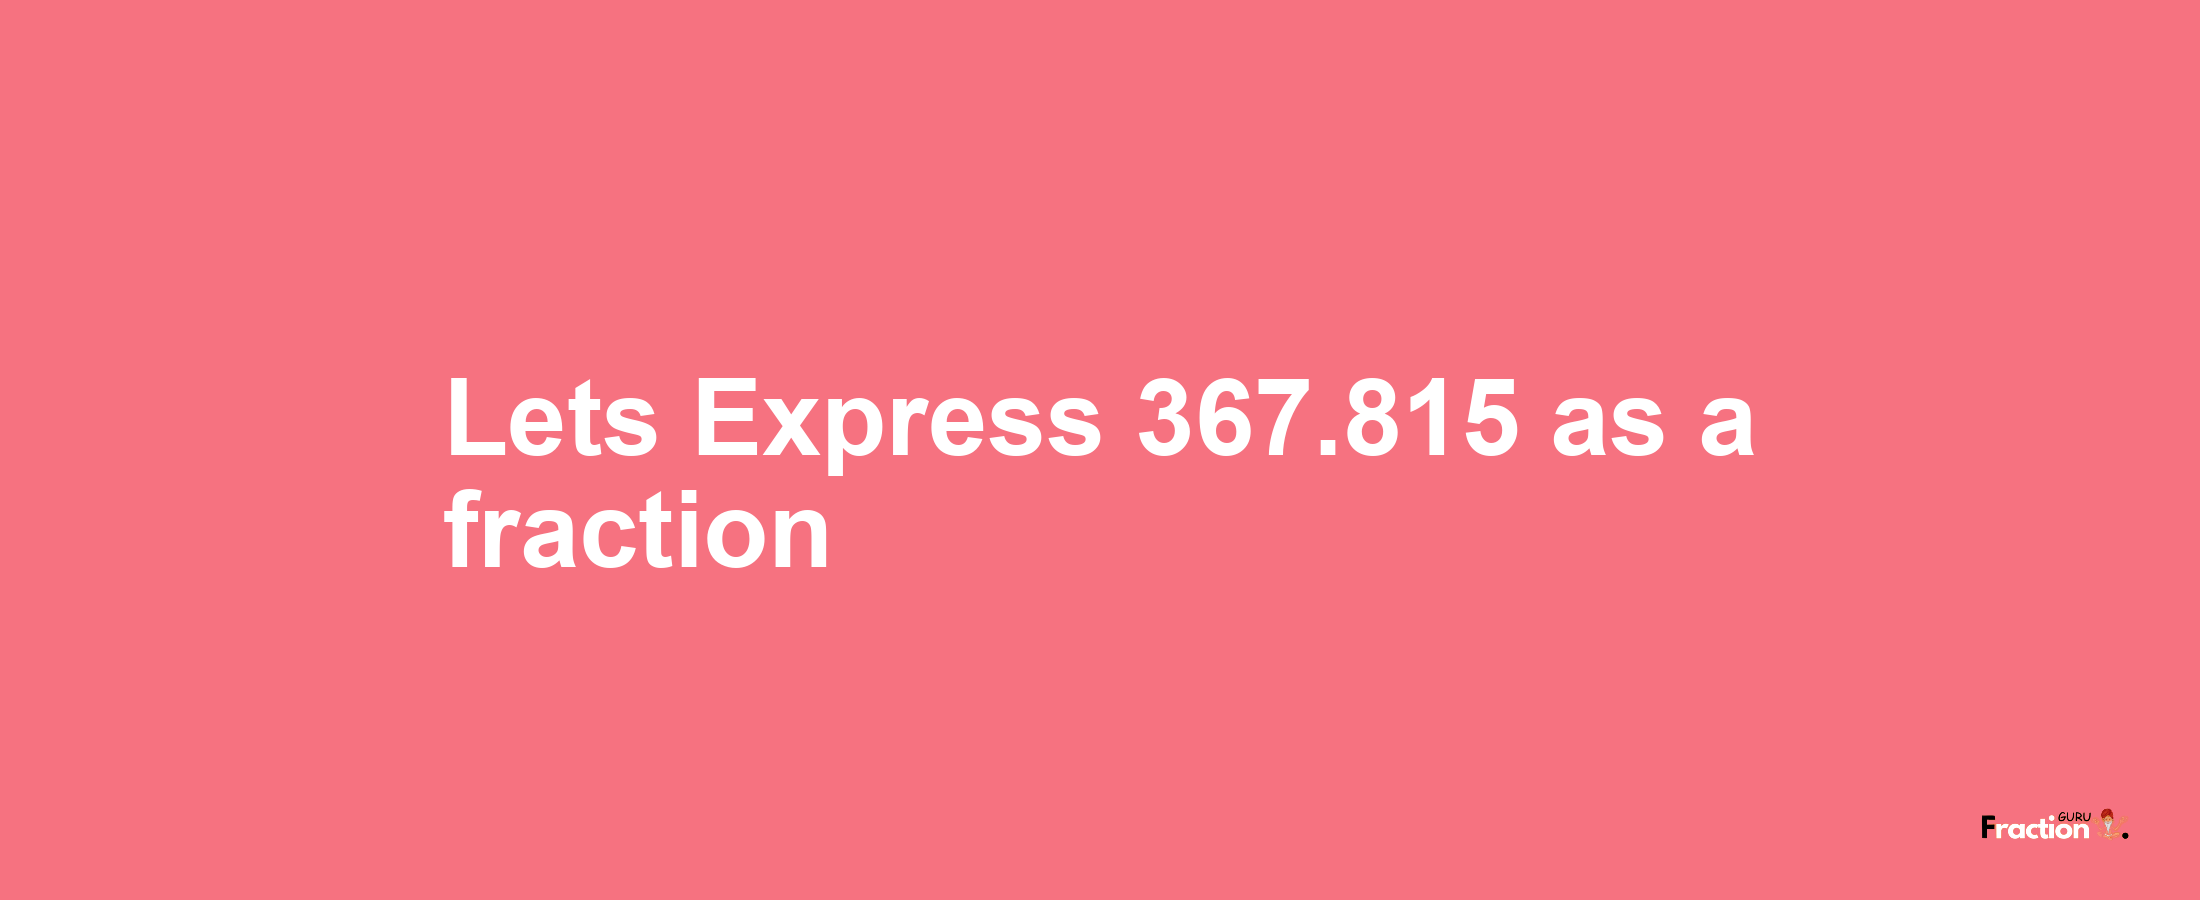 Lets Express 367.815 as afraction